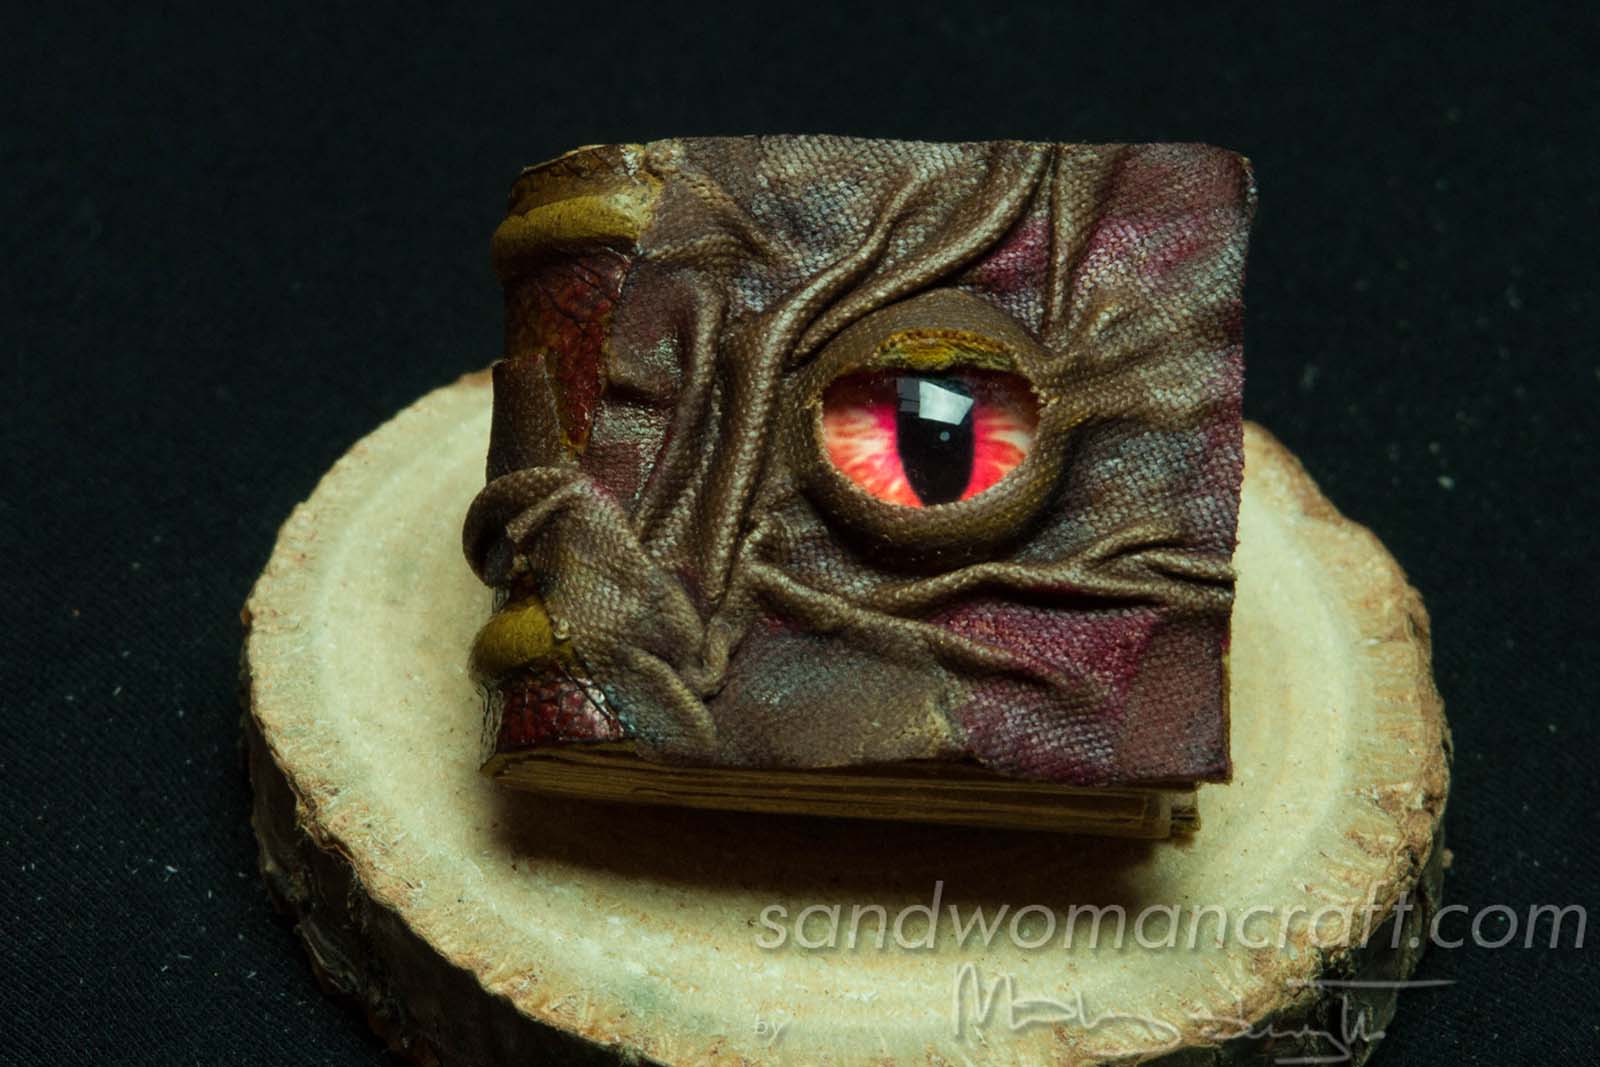 Miniature book with dragon's eye